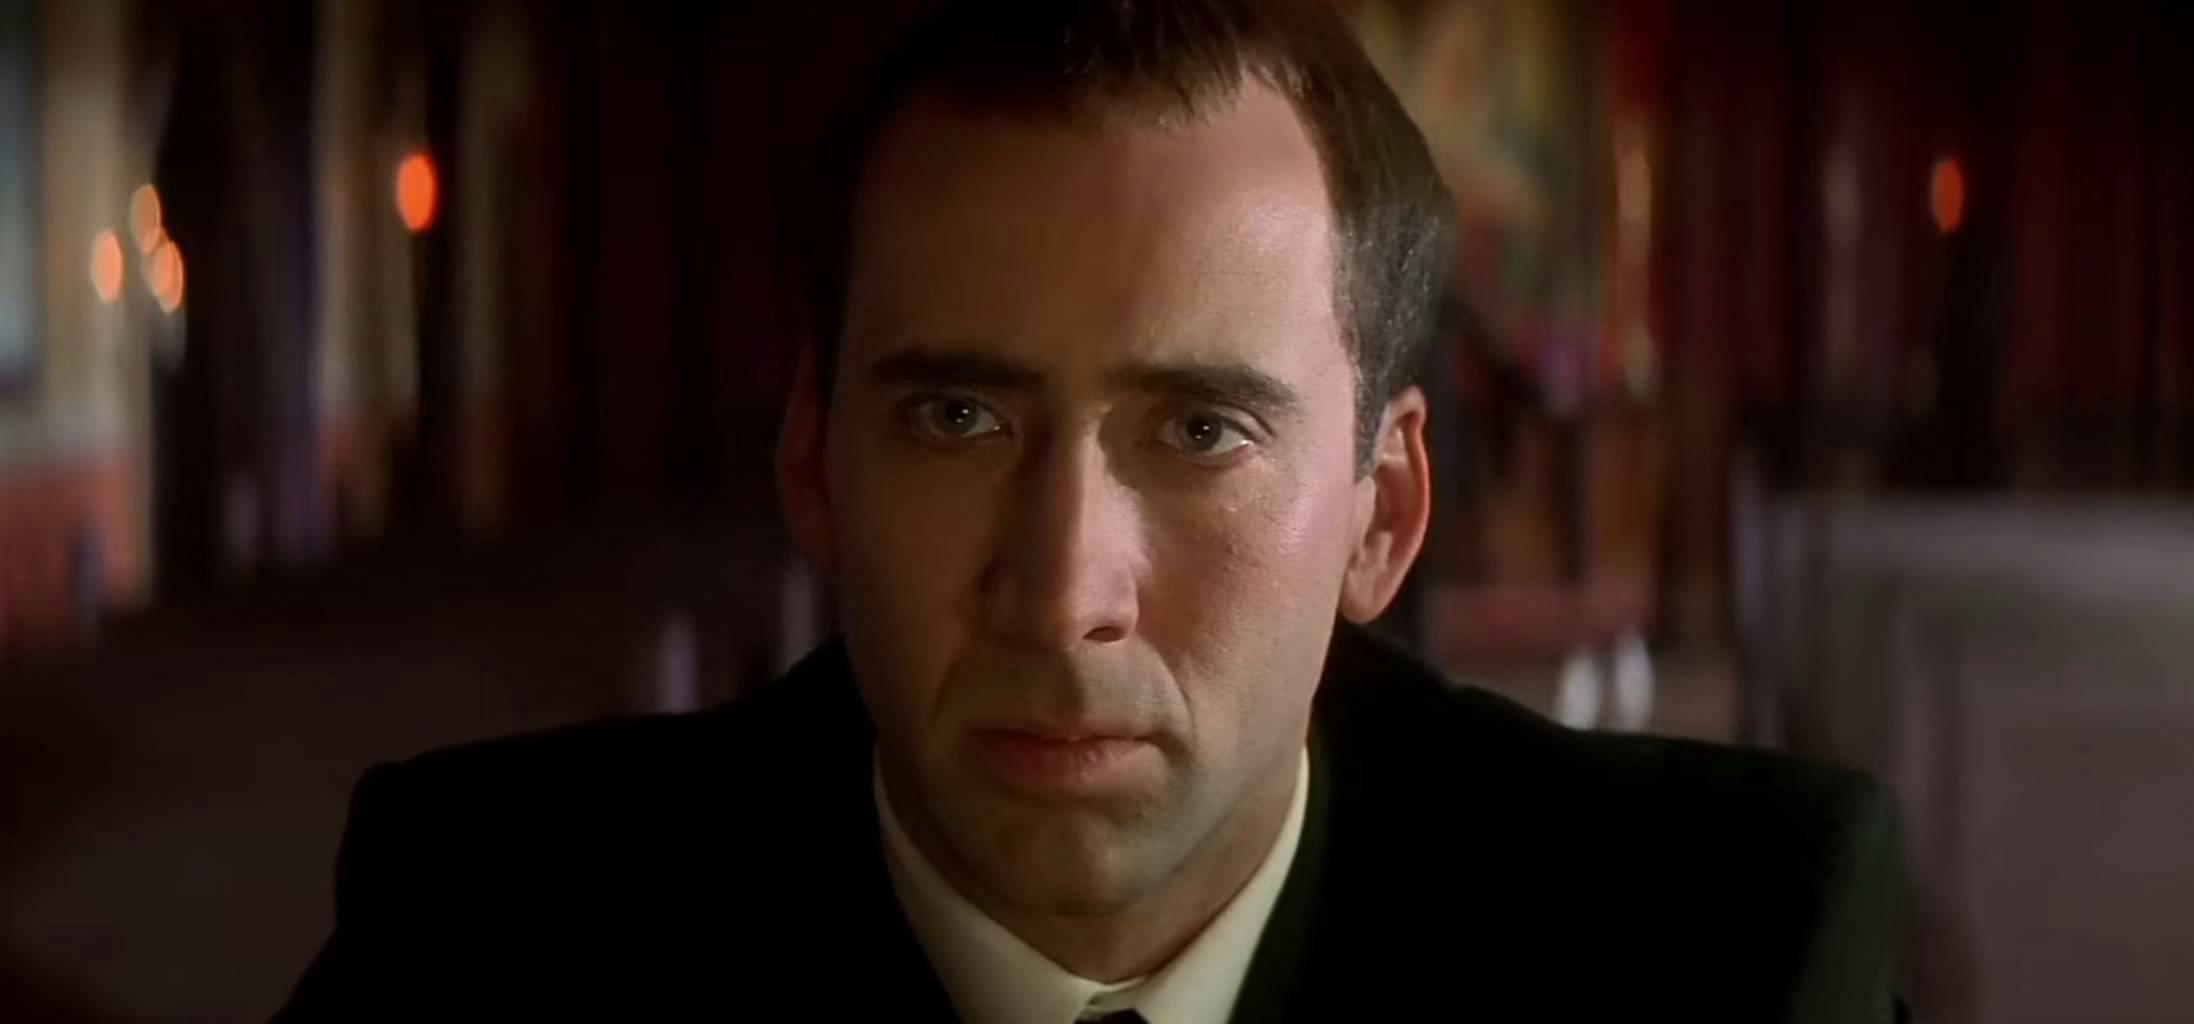 90s movies on Netflix - Face/Off